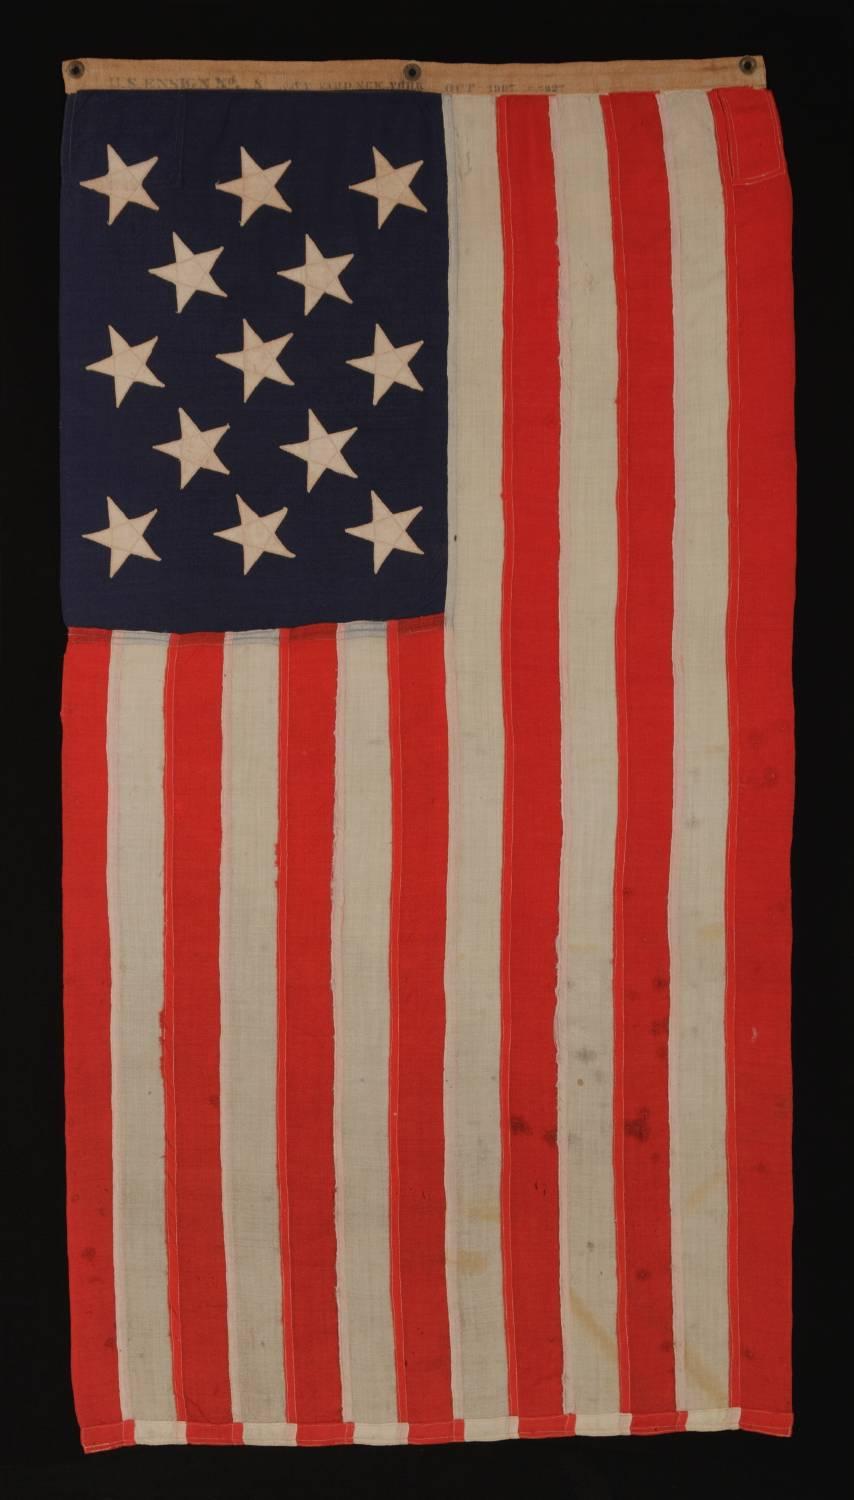 13 stars, a us navy small boat ensign made at the Brooklyn Navy Yard, New York, dated 1907:

13 star American national flag of the type used by the U.S. Navy on small boats around the turn-of-the-century. The reverse side of the coarse linen